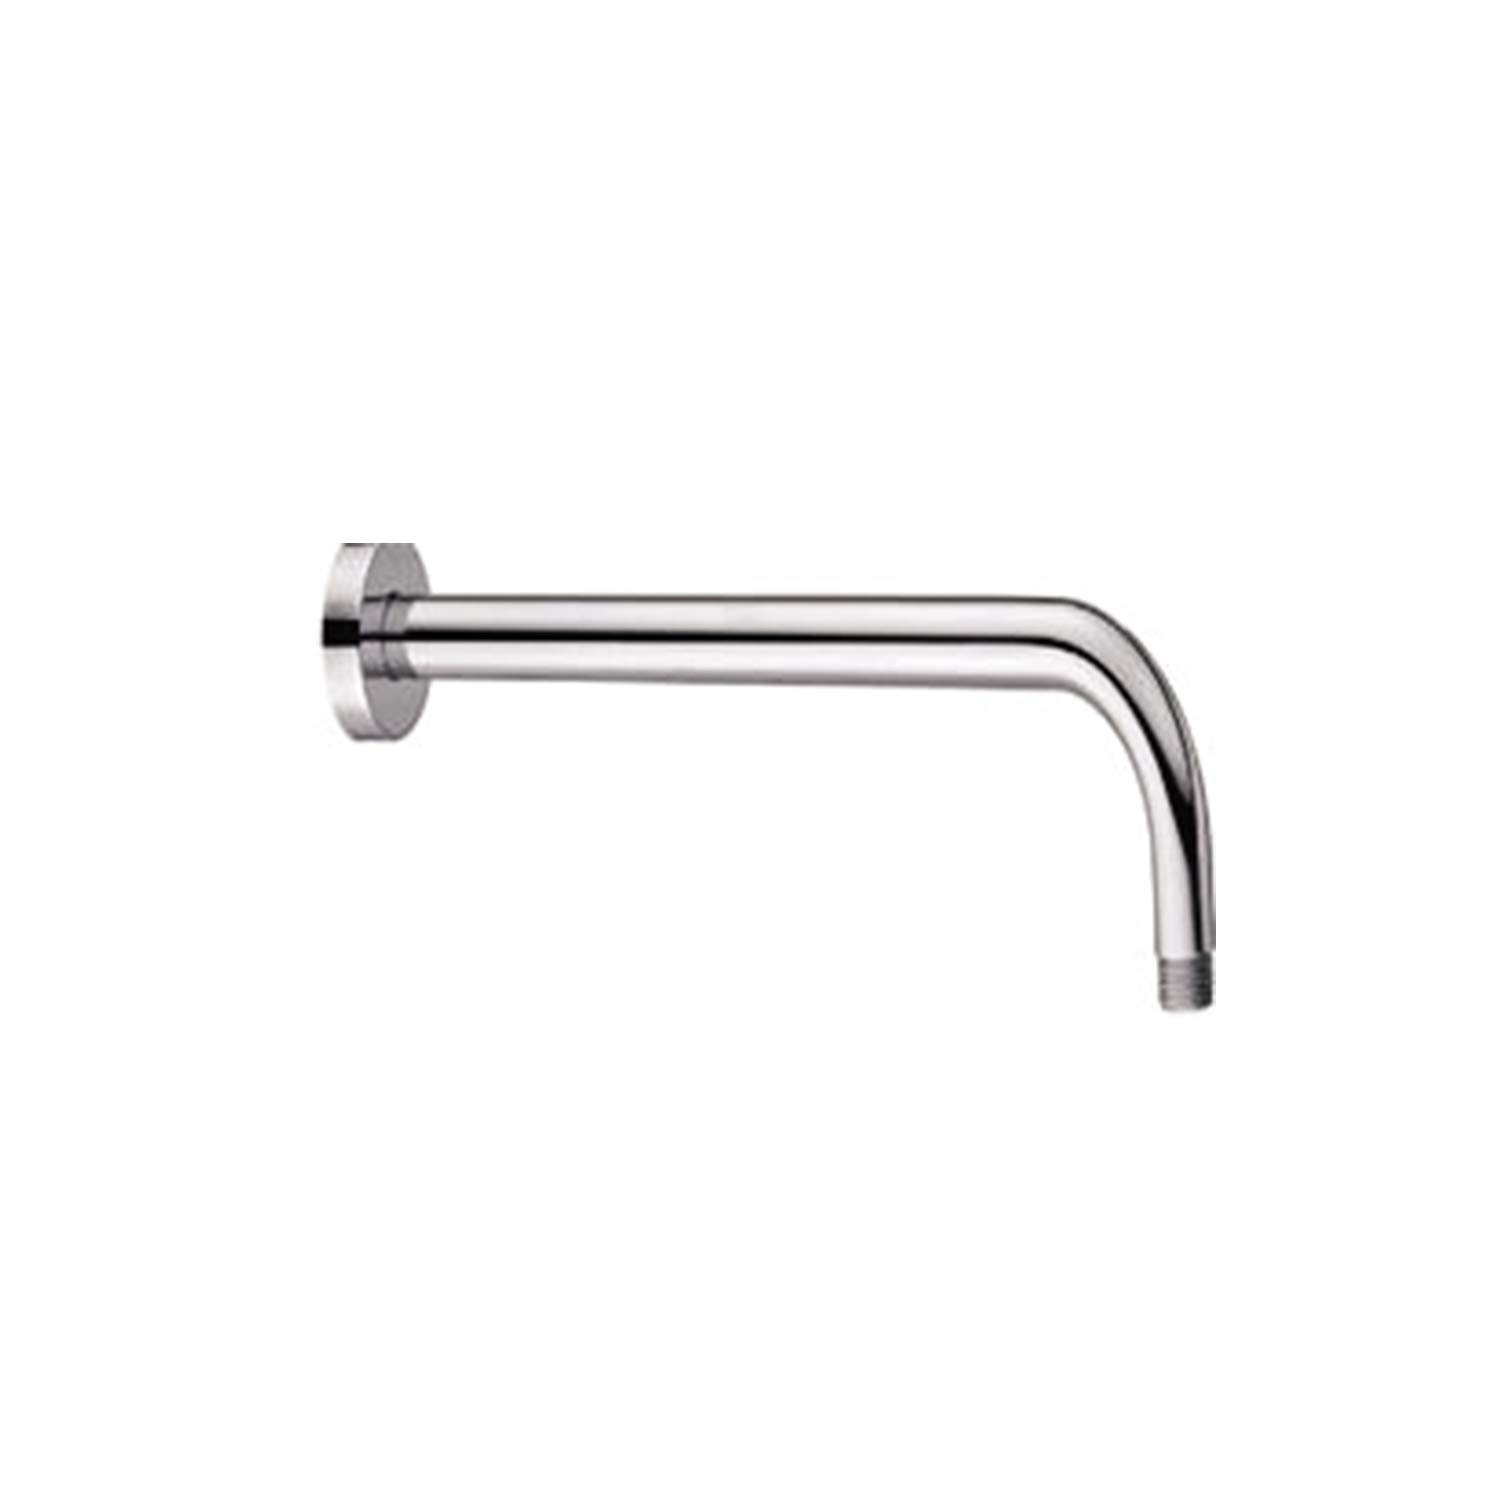 Parryware Wall Mounted Shower Arm 15" - T9802A1